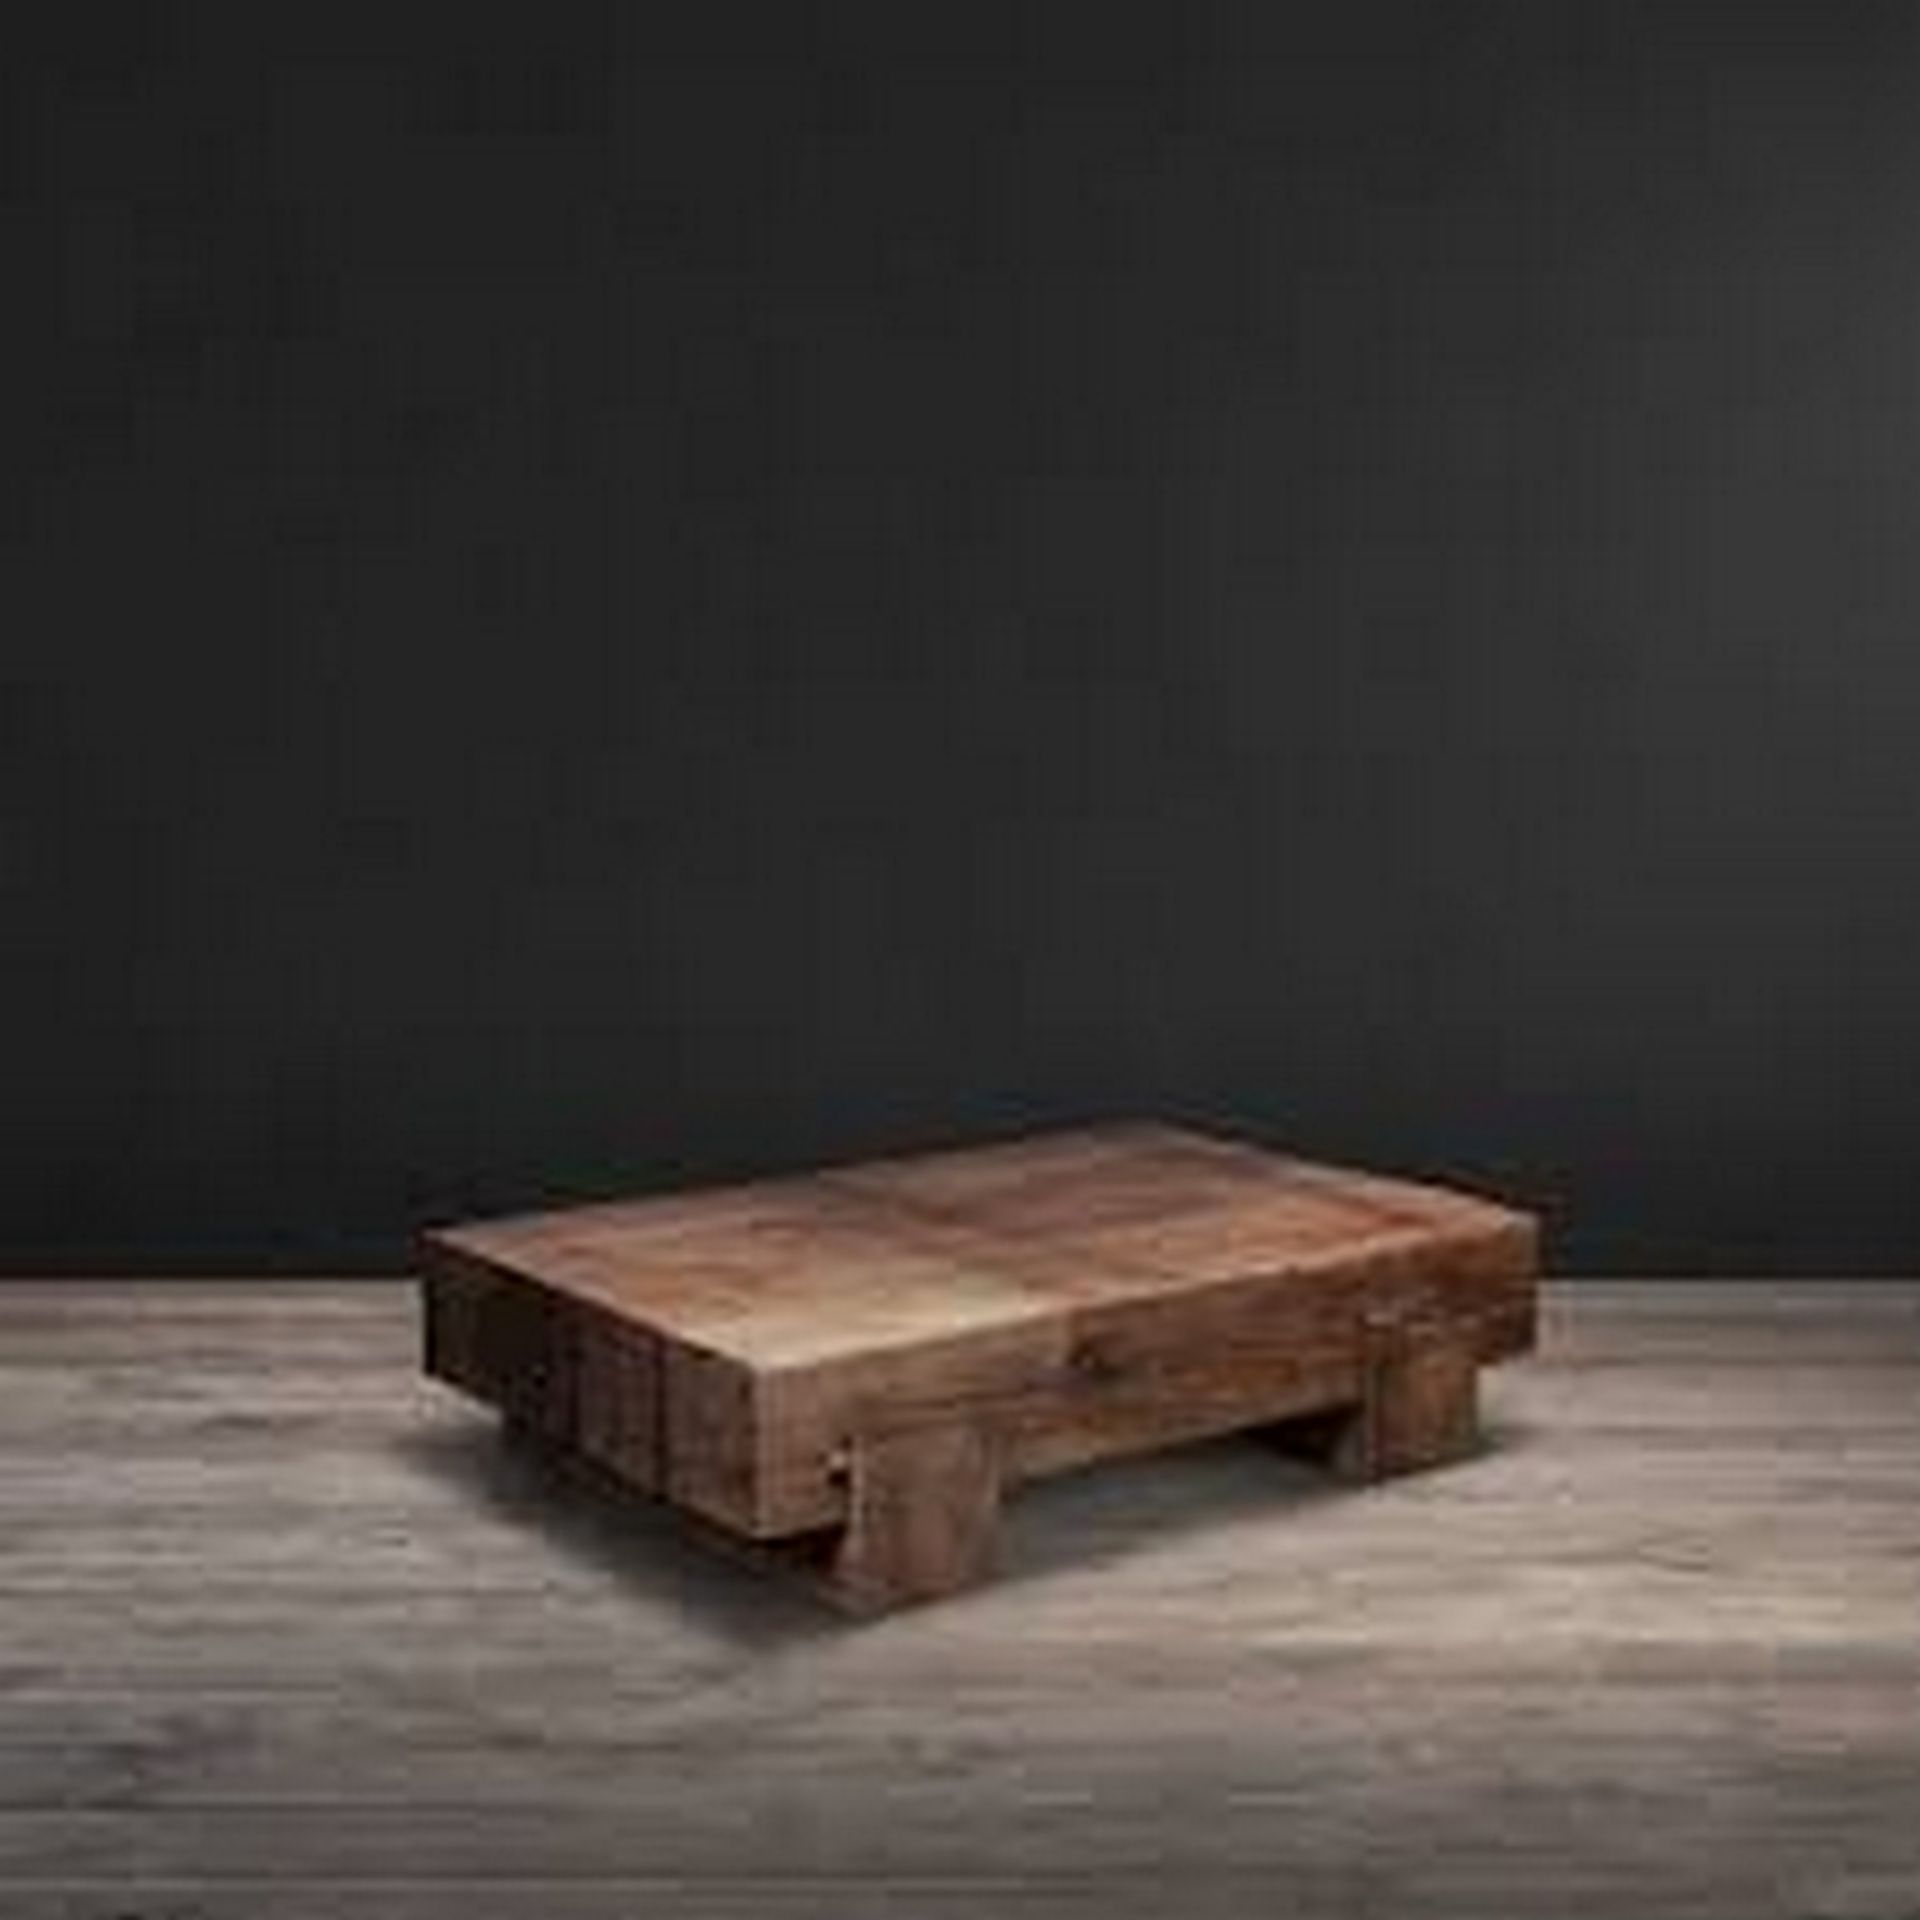 Coffee Table Kitkat Coffee Table Genuine English Reclaimed Timber Sourced From The Woods Of England, - Image 4 of 6